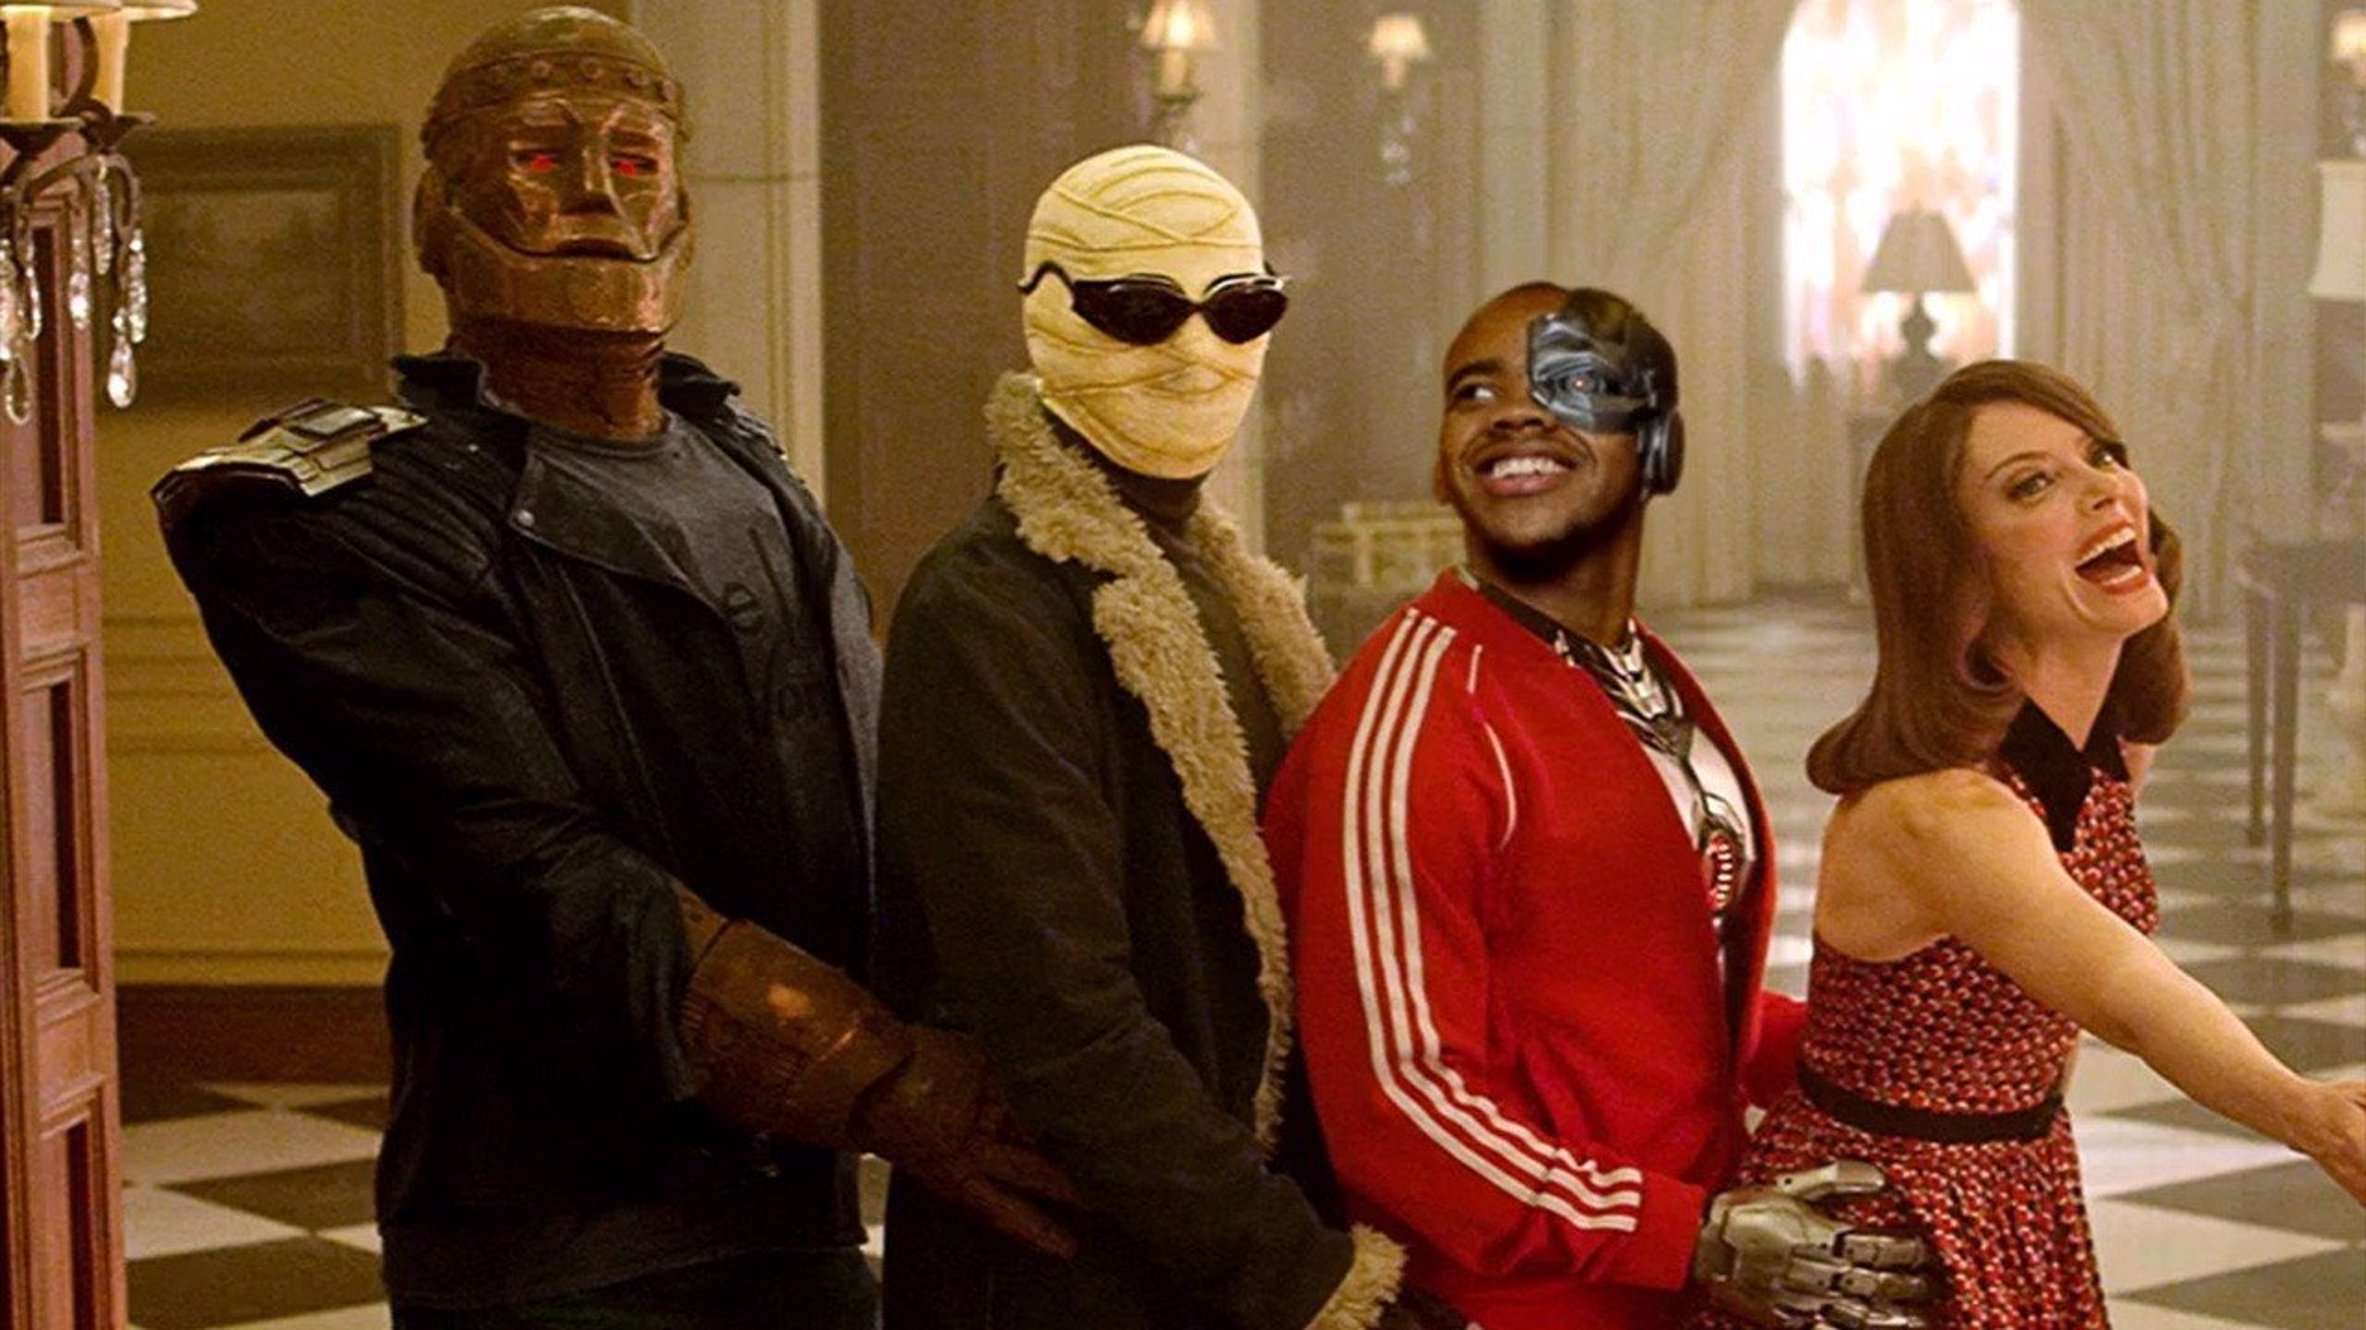 Doom Patrol is Now Casting for Nerds and Geeks